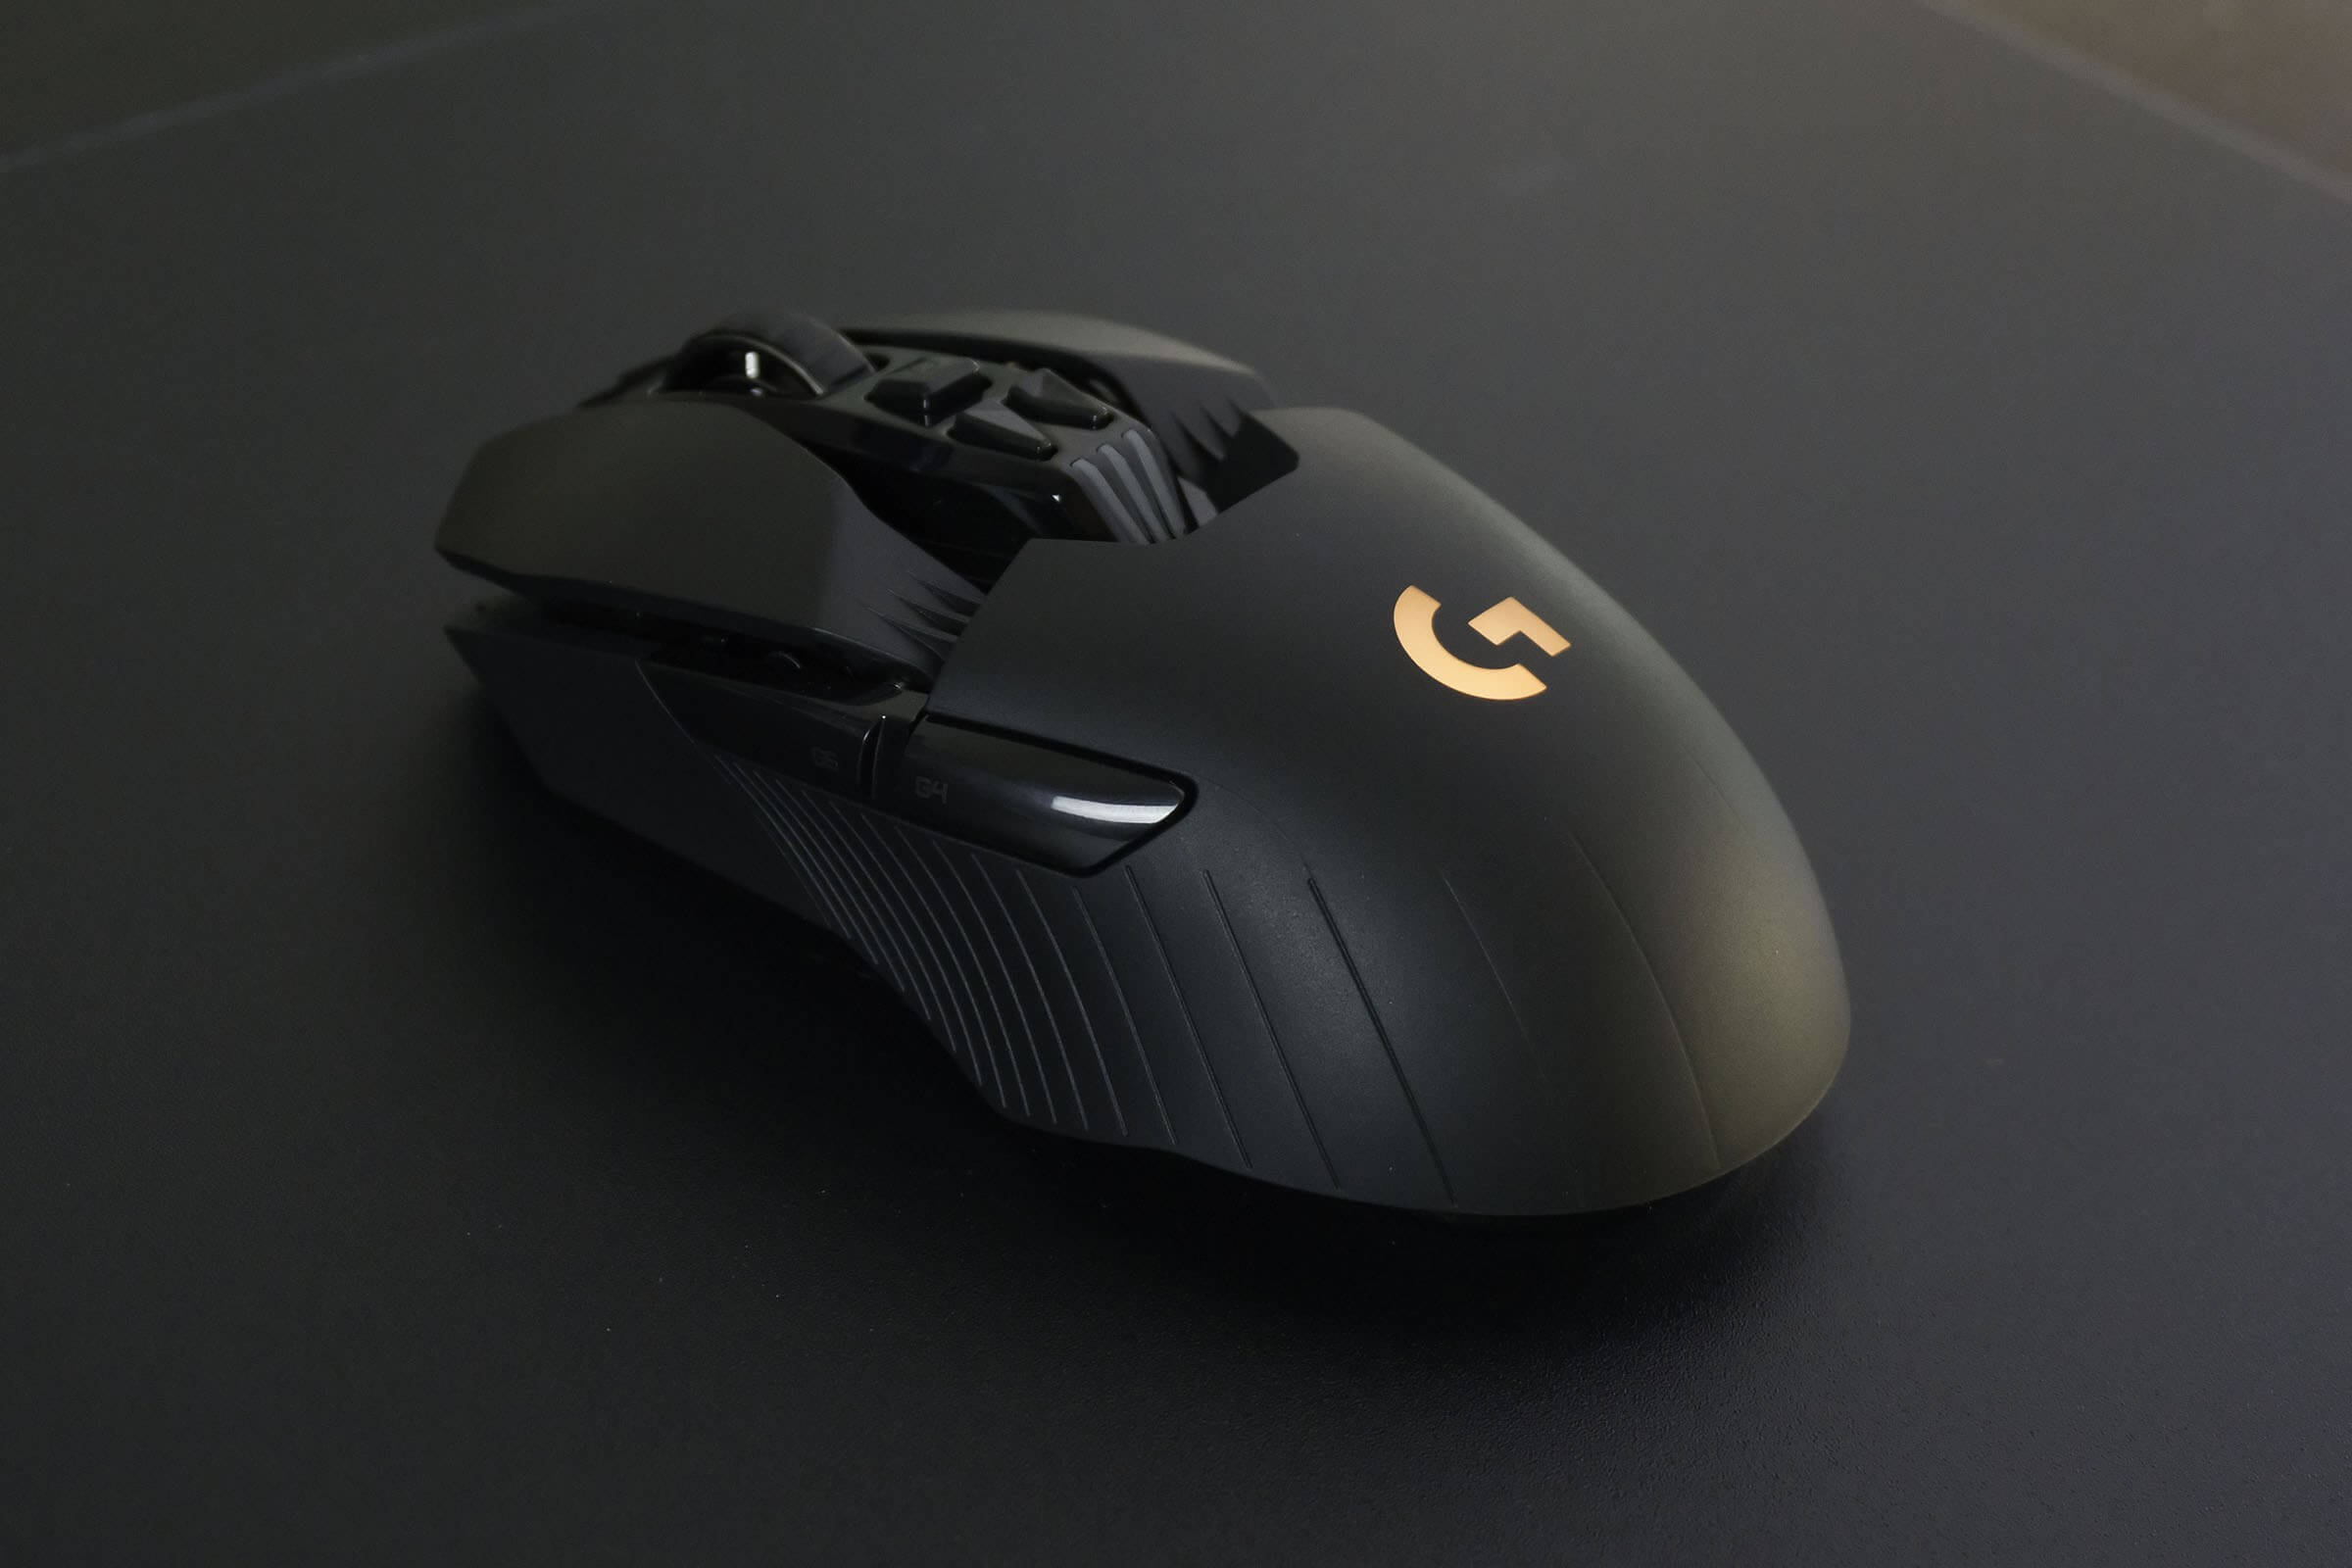 Logitech's G-series gaming mice get the HERO treatment with updated 16K DPI sensors